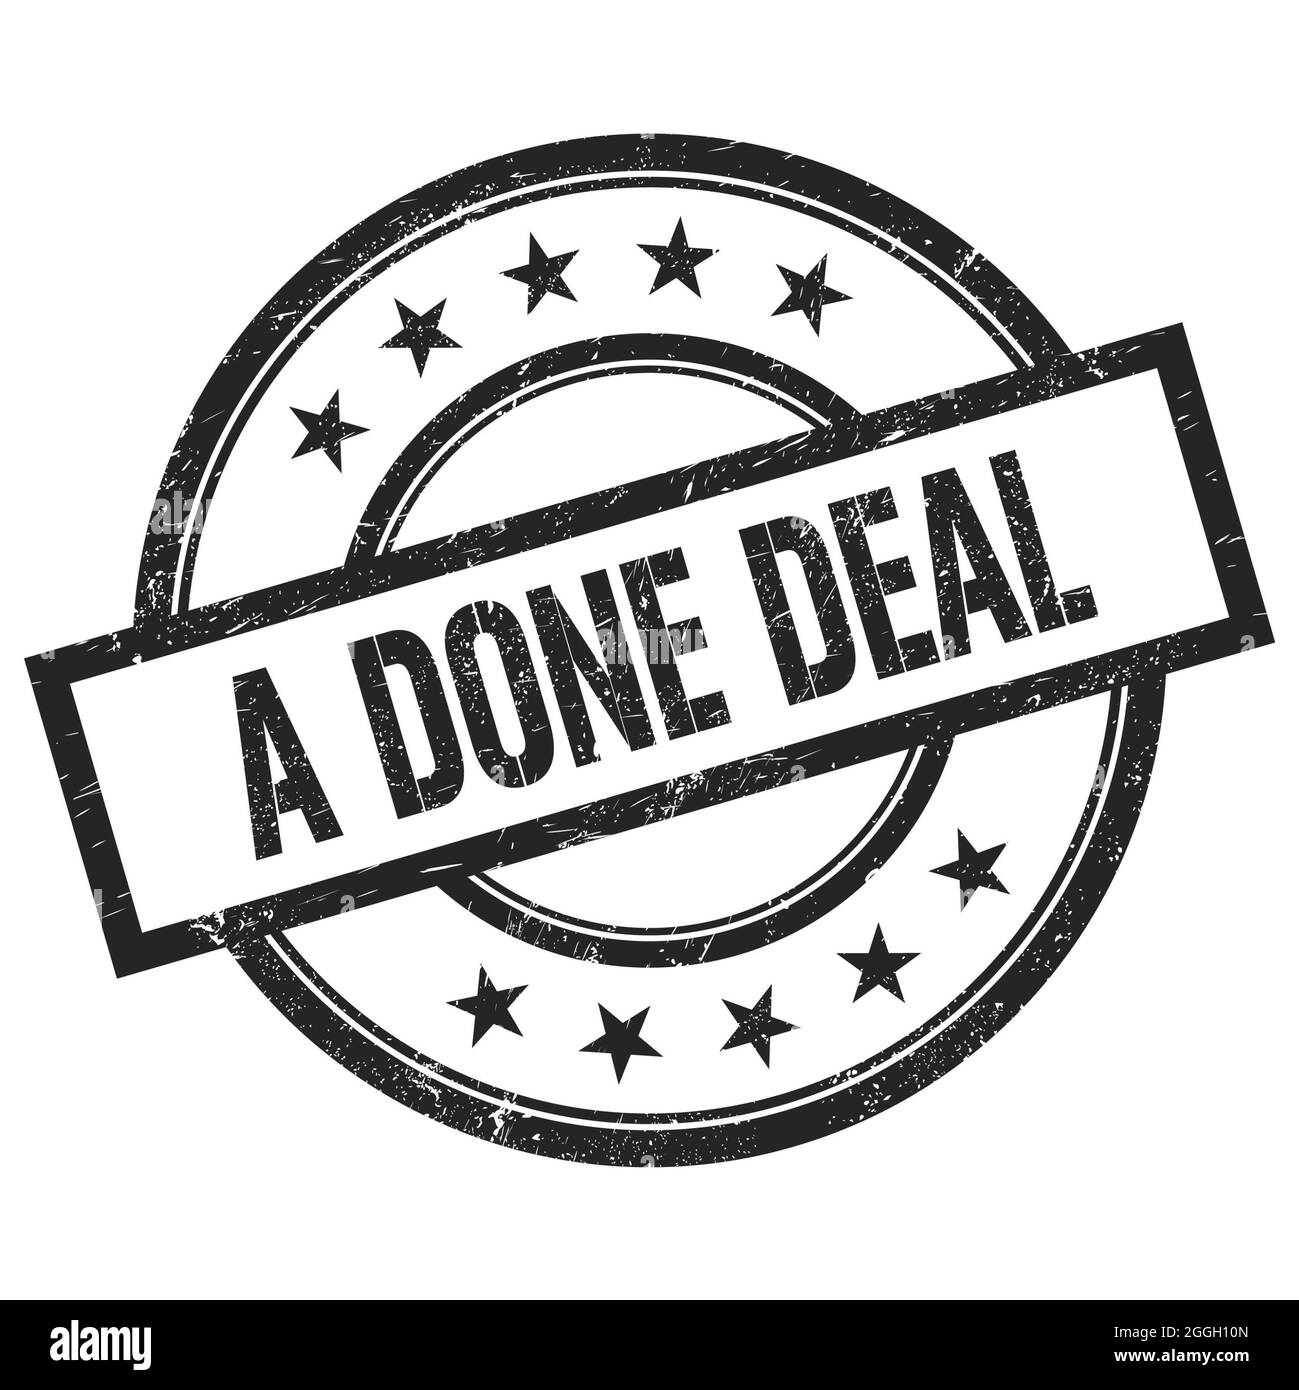 A DONE DEAL text written on black round vintage rubber stamp. Stock Photo